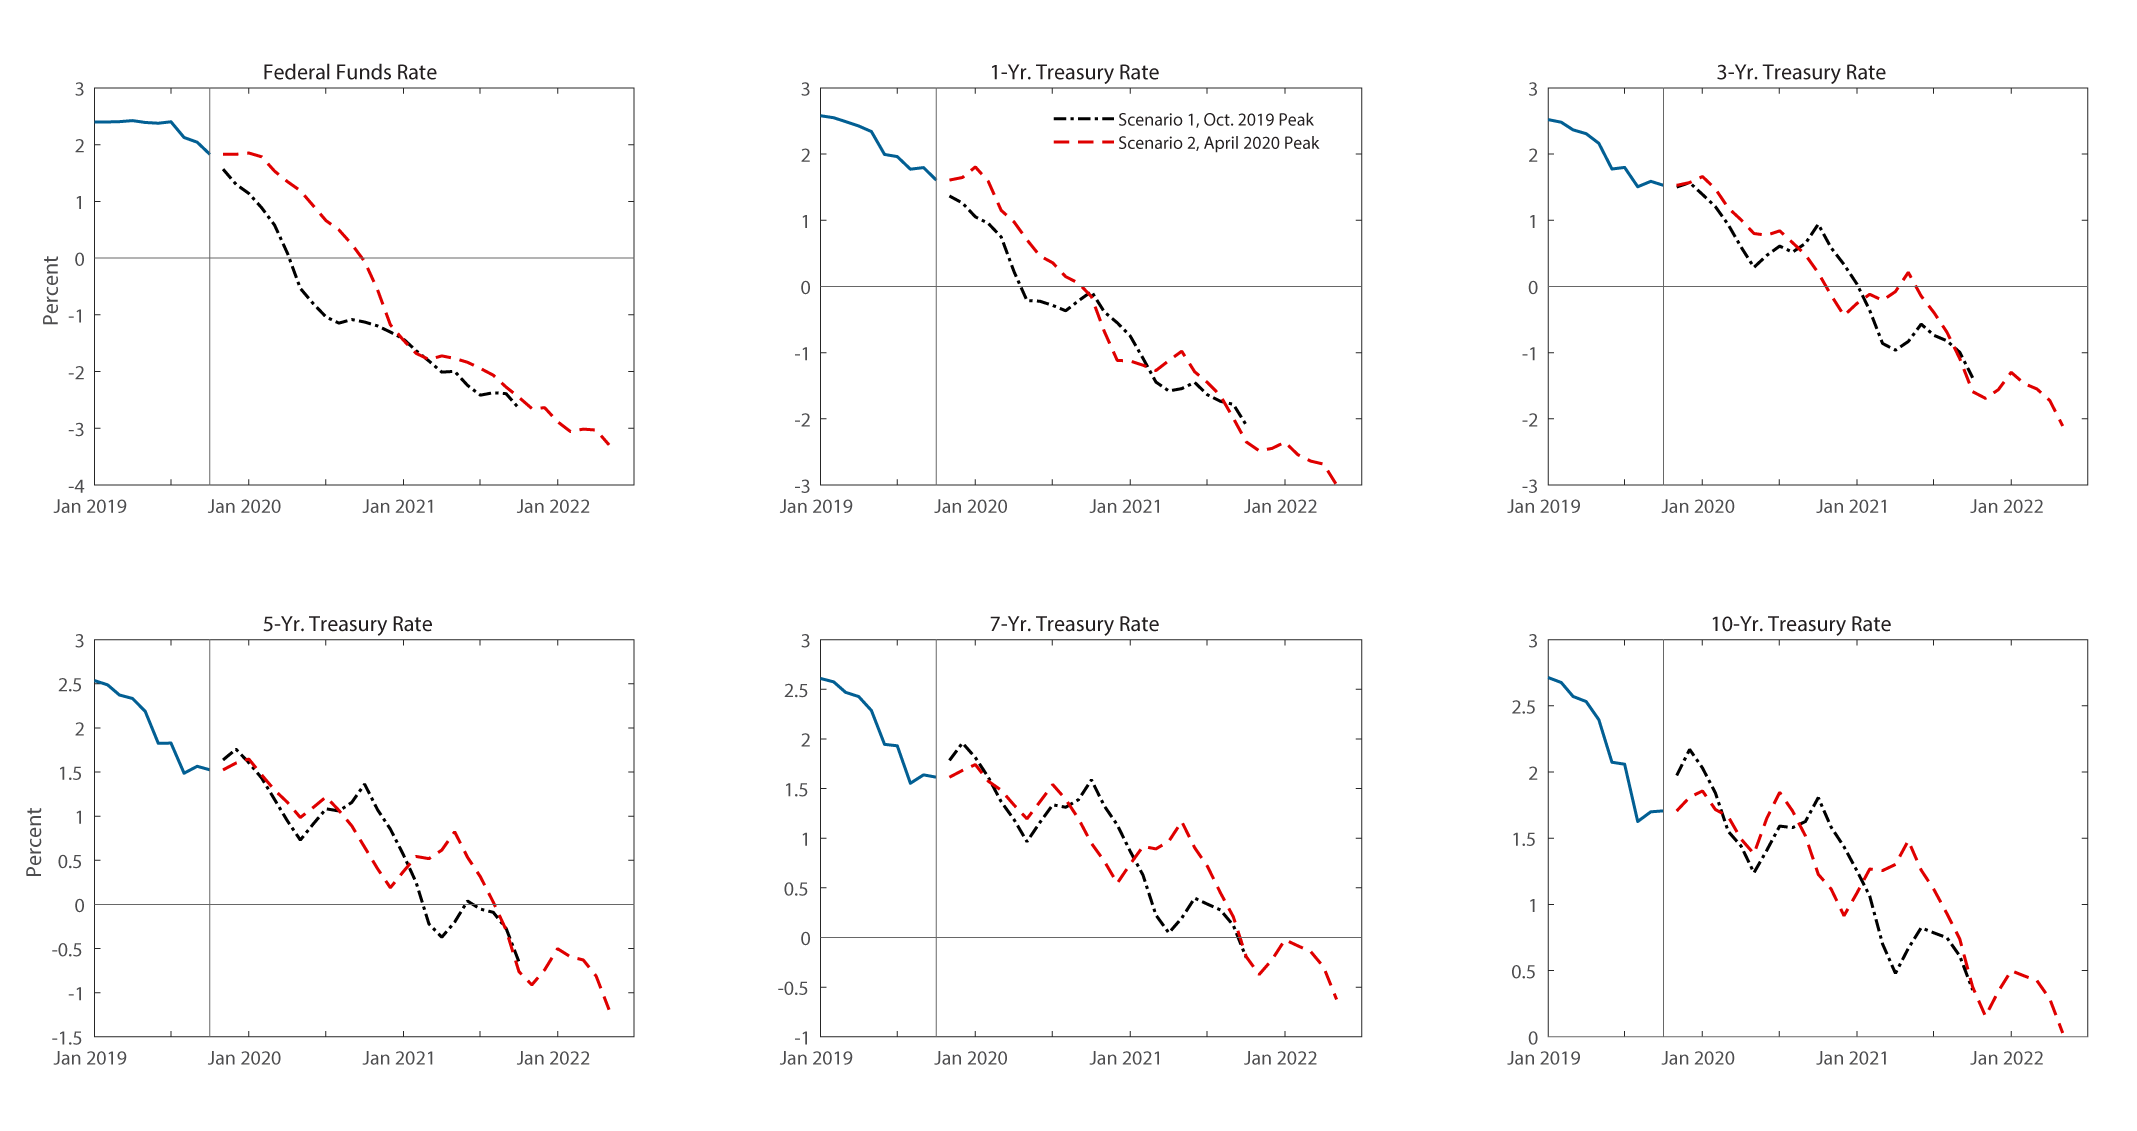 Figure 3. Nominal Interest Rates in Two Recession Scenarios. See accessible link for data description.